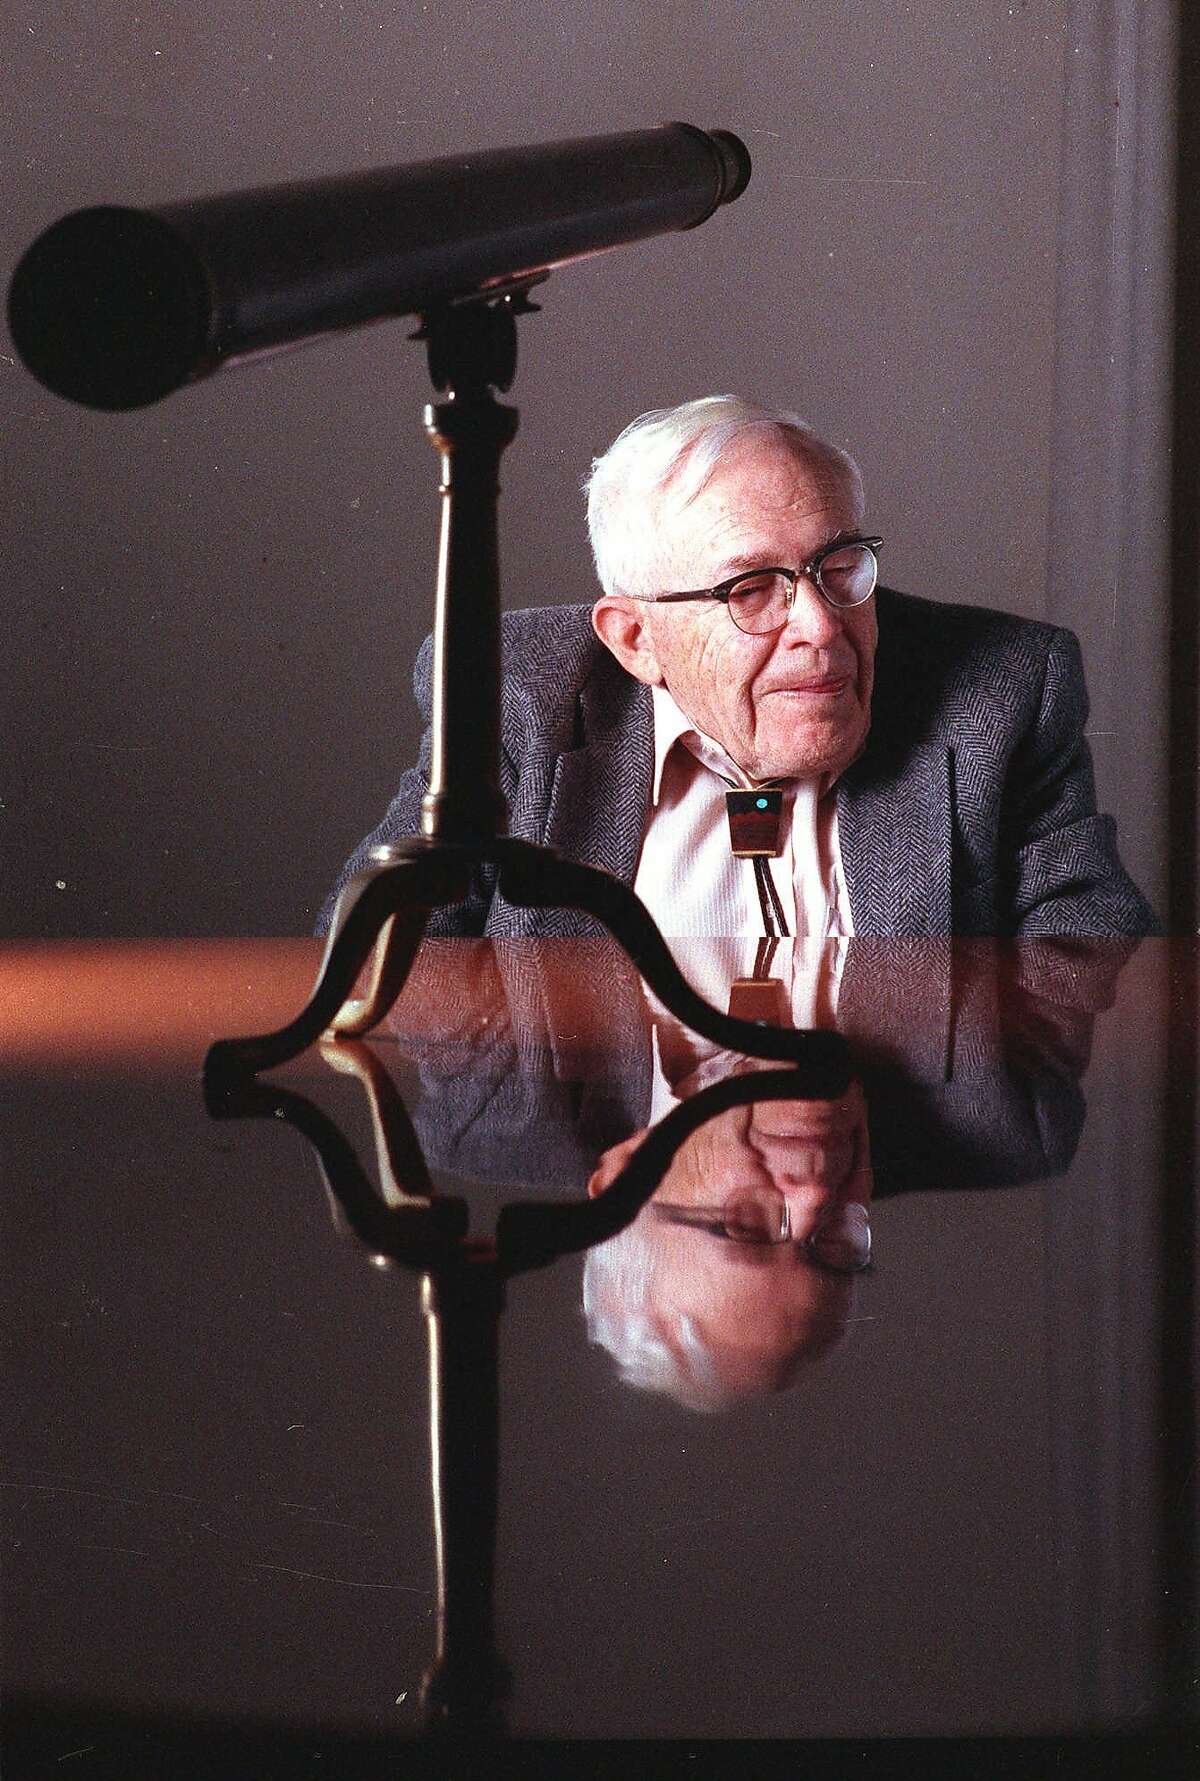 FILE- This 1990 file photo shows Clyde Tombaugh in New York. On Tuesday, July 14, 2015, NASA's New Horizons spacecraft, carrying a small canister with his ashes, is scheduled to pass within 7,800 miles of Pluto which he discovered 85 years ago.